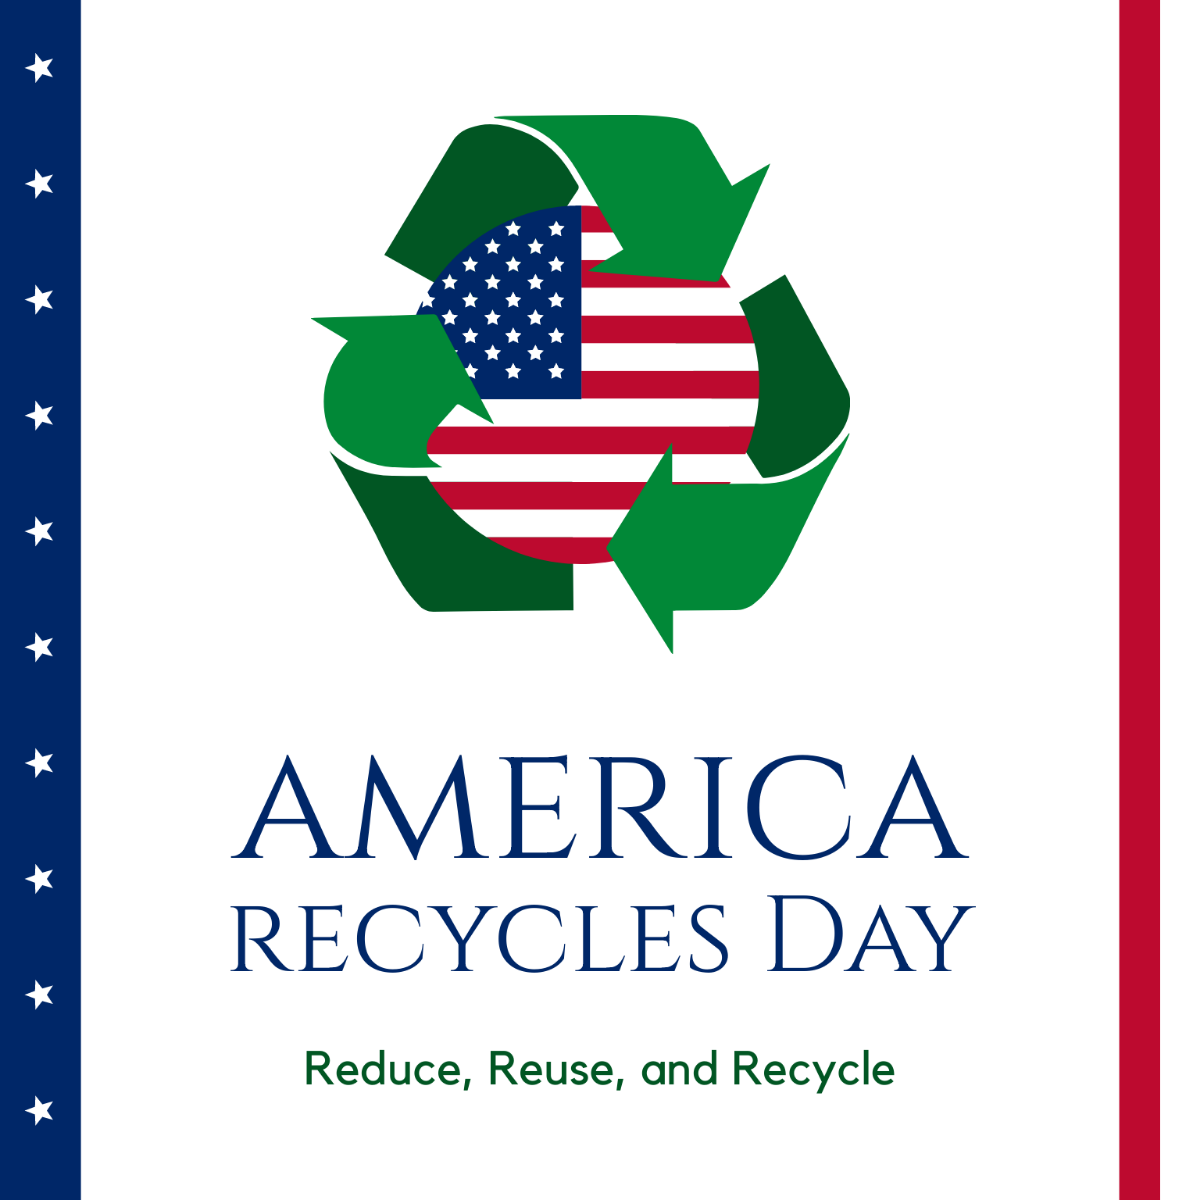 Free America Recycles Day Flyer Vector Template